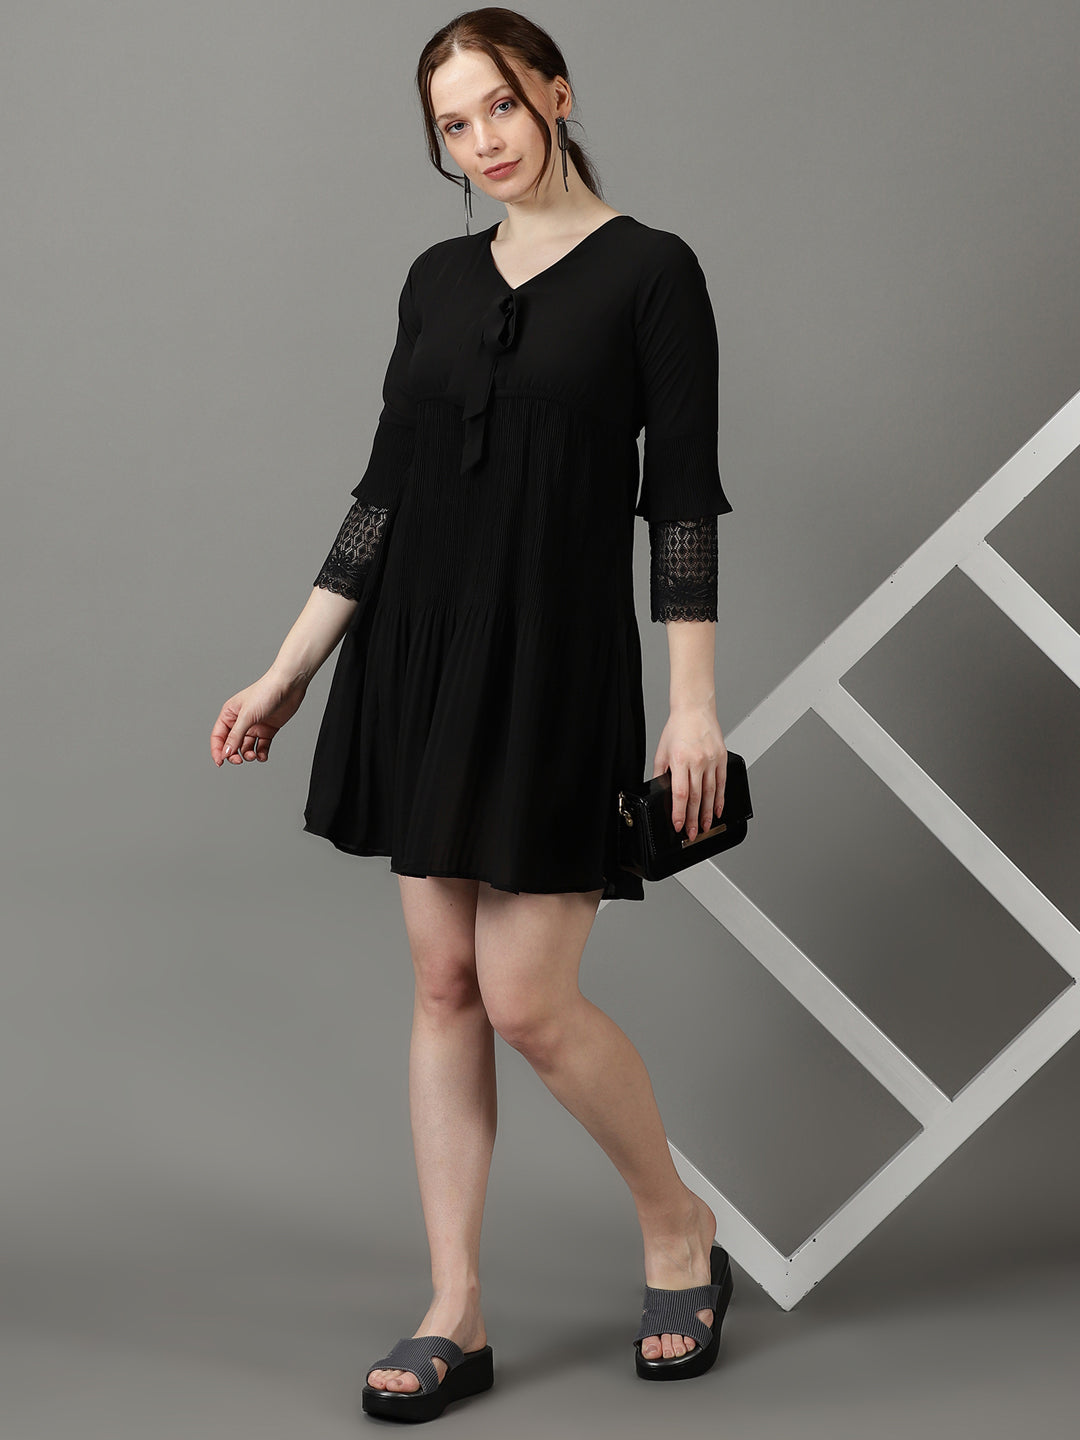 Women's Black Solid Fit and Flare Dress